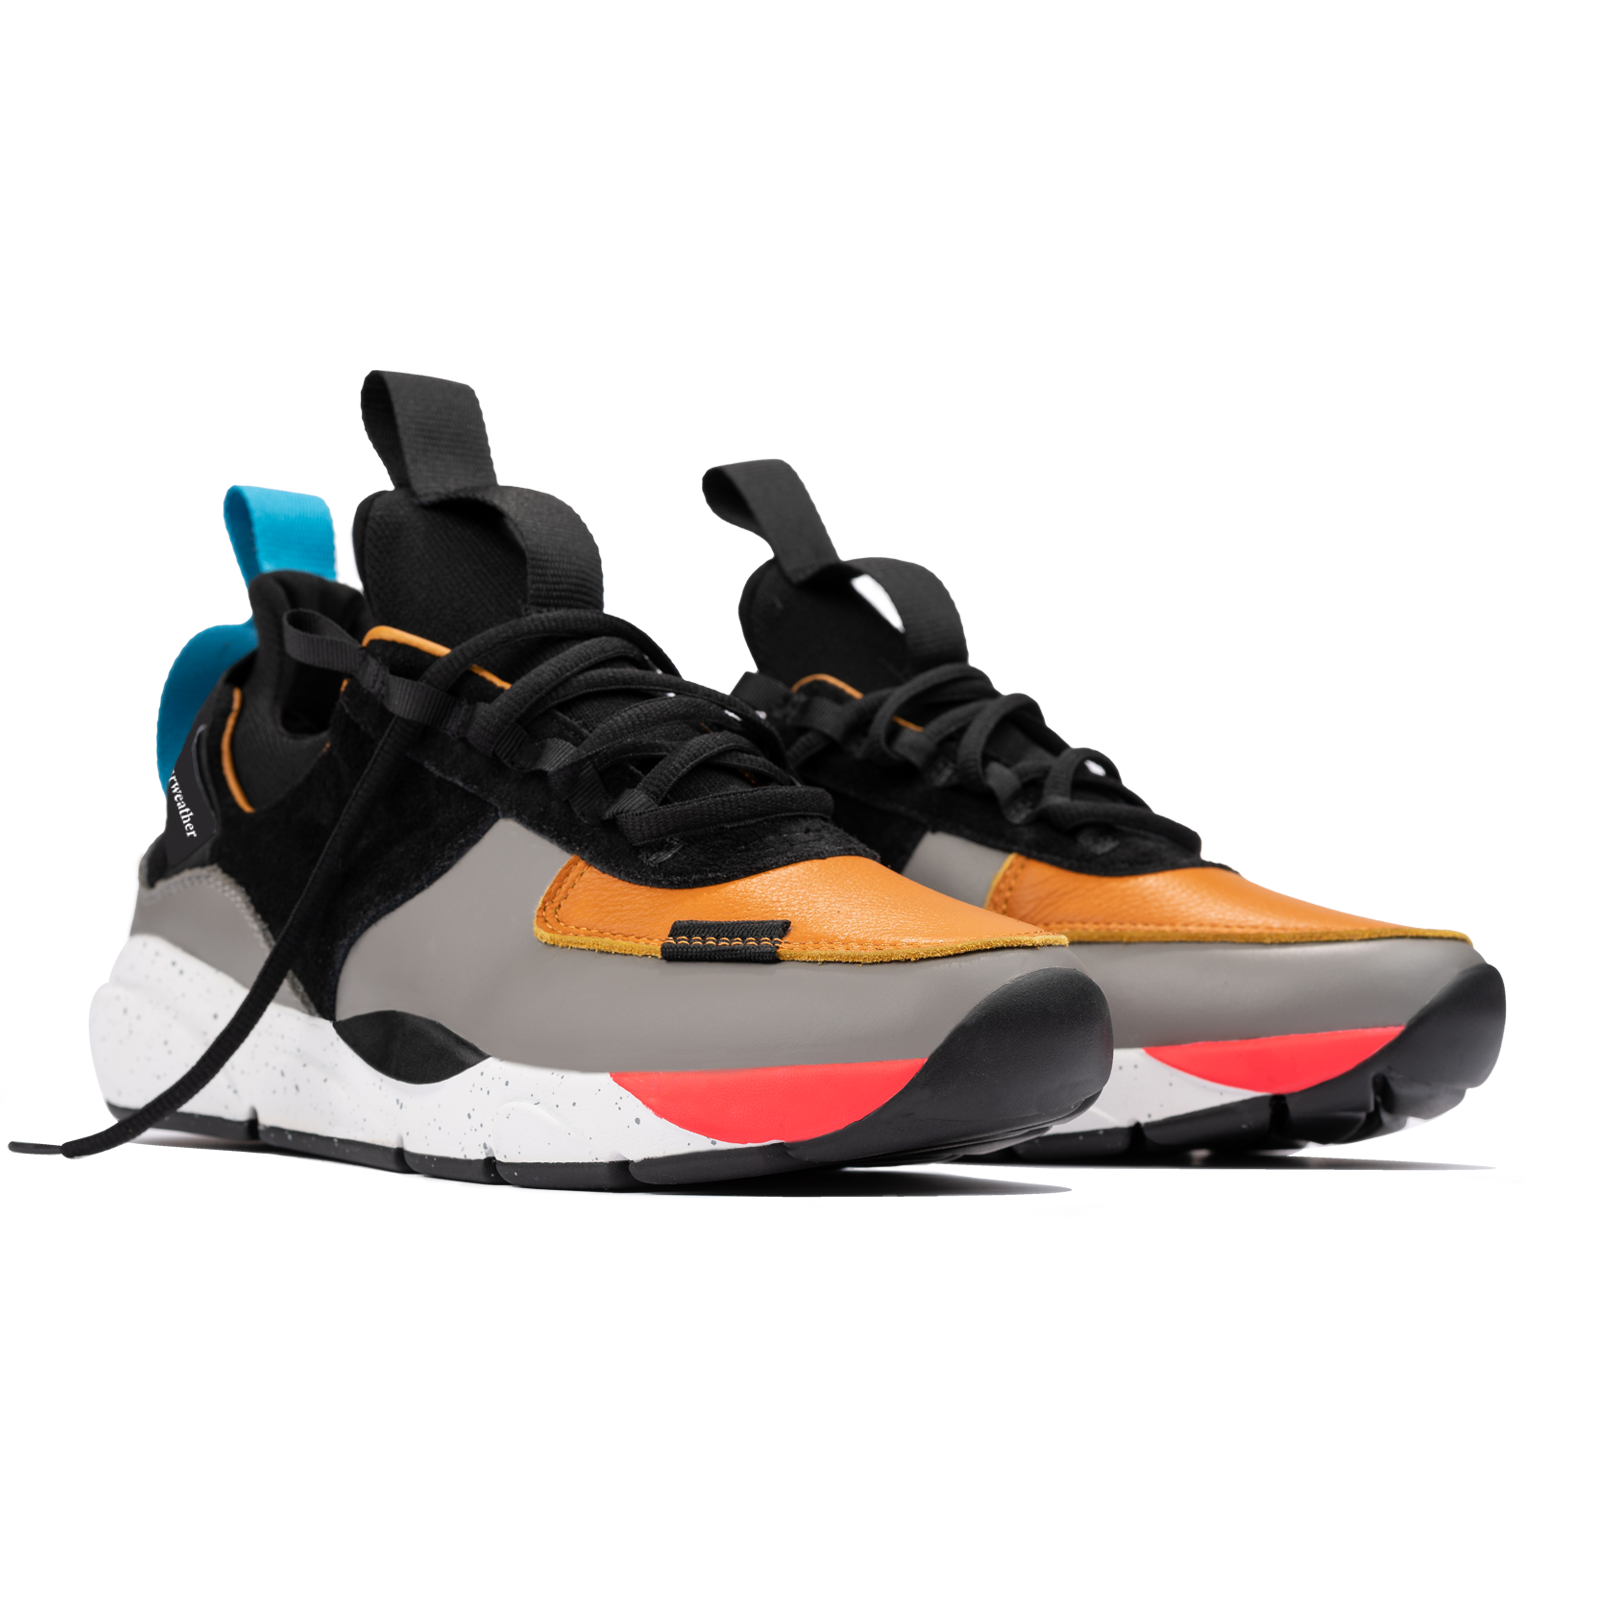 Front 3/4 view, The Contera Kalahari is a Runner with grey leather black suede and tabaco orange leather, Blue webbing heel pull, Black webbin tongue pull, Black webbing lace system, painted eva midsole ande black rubber outsole.